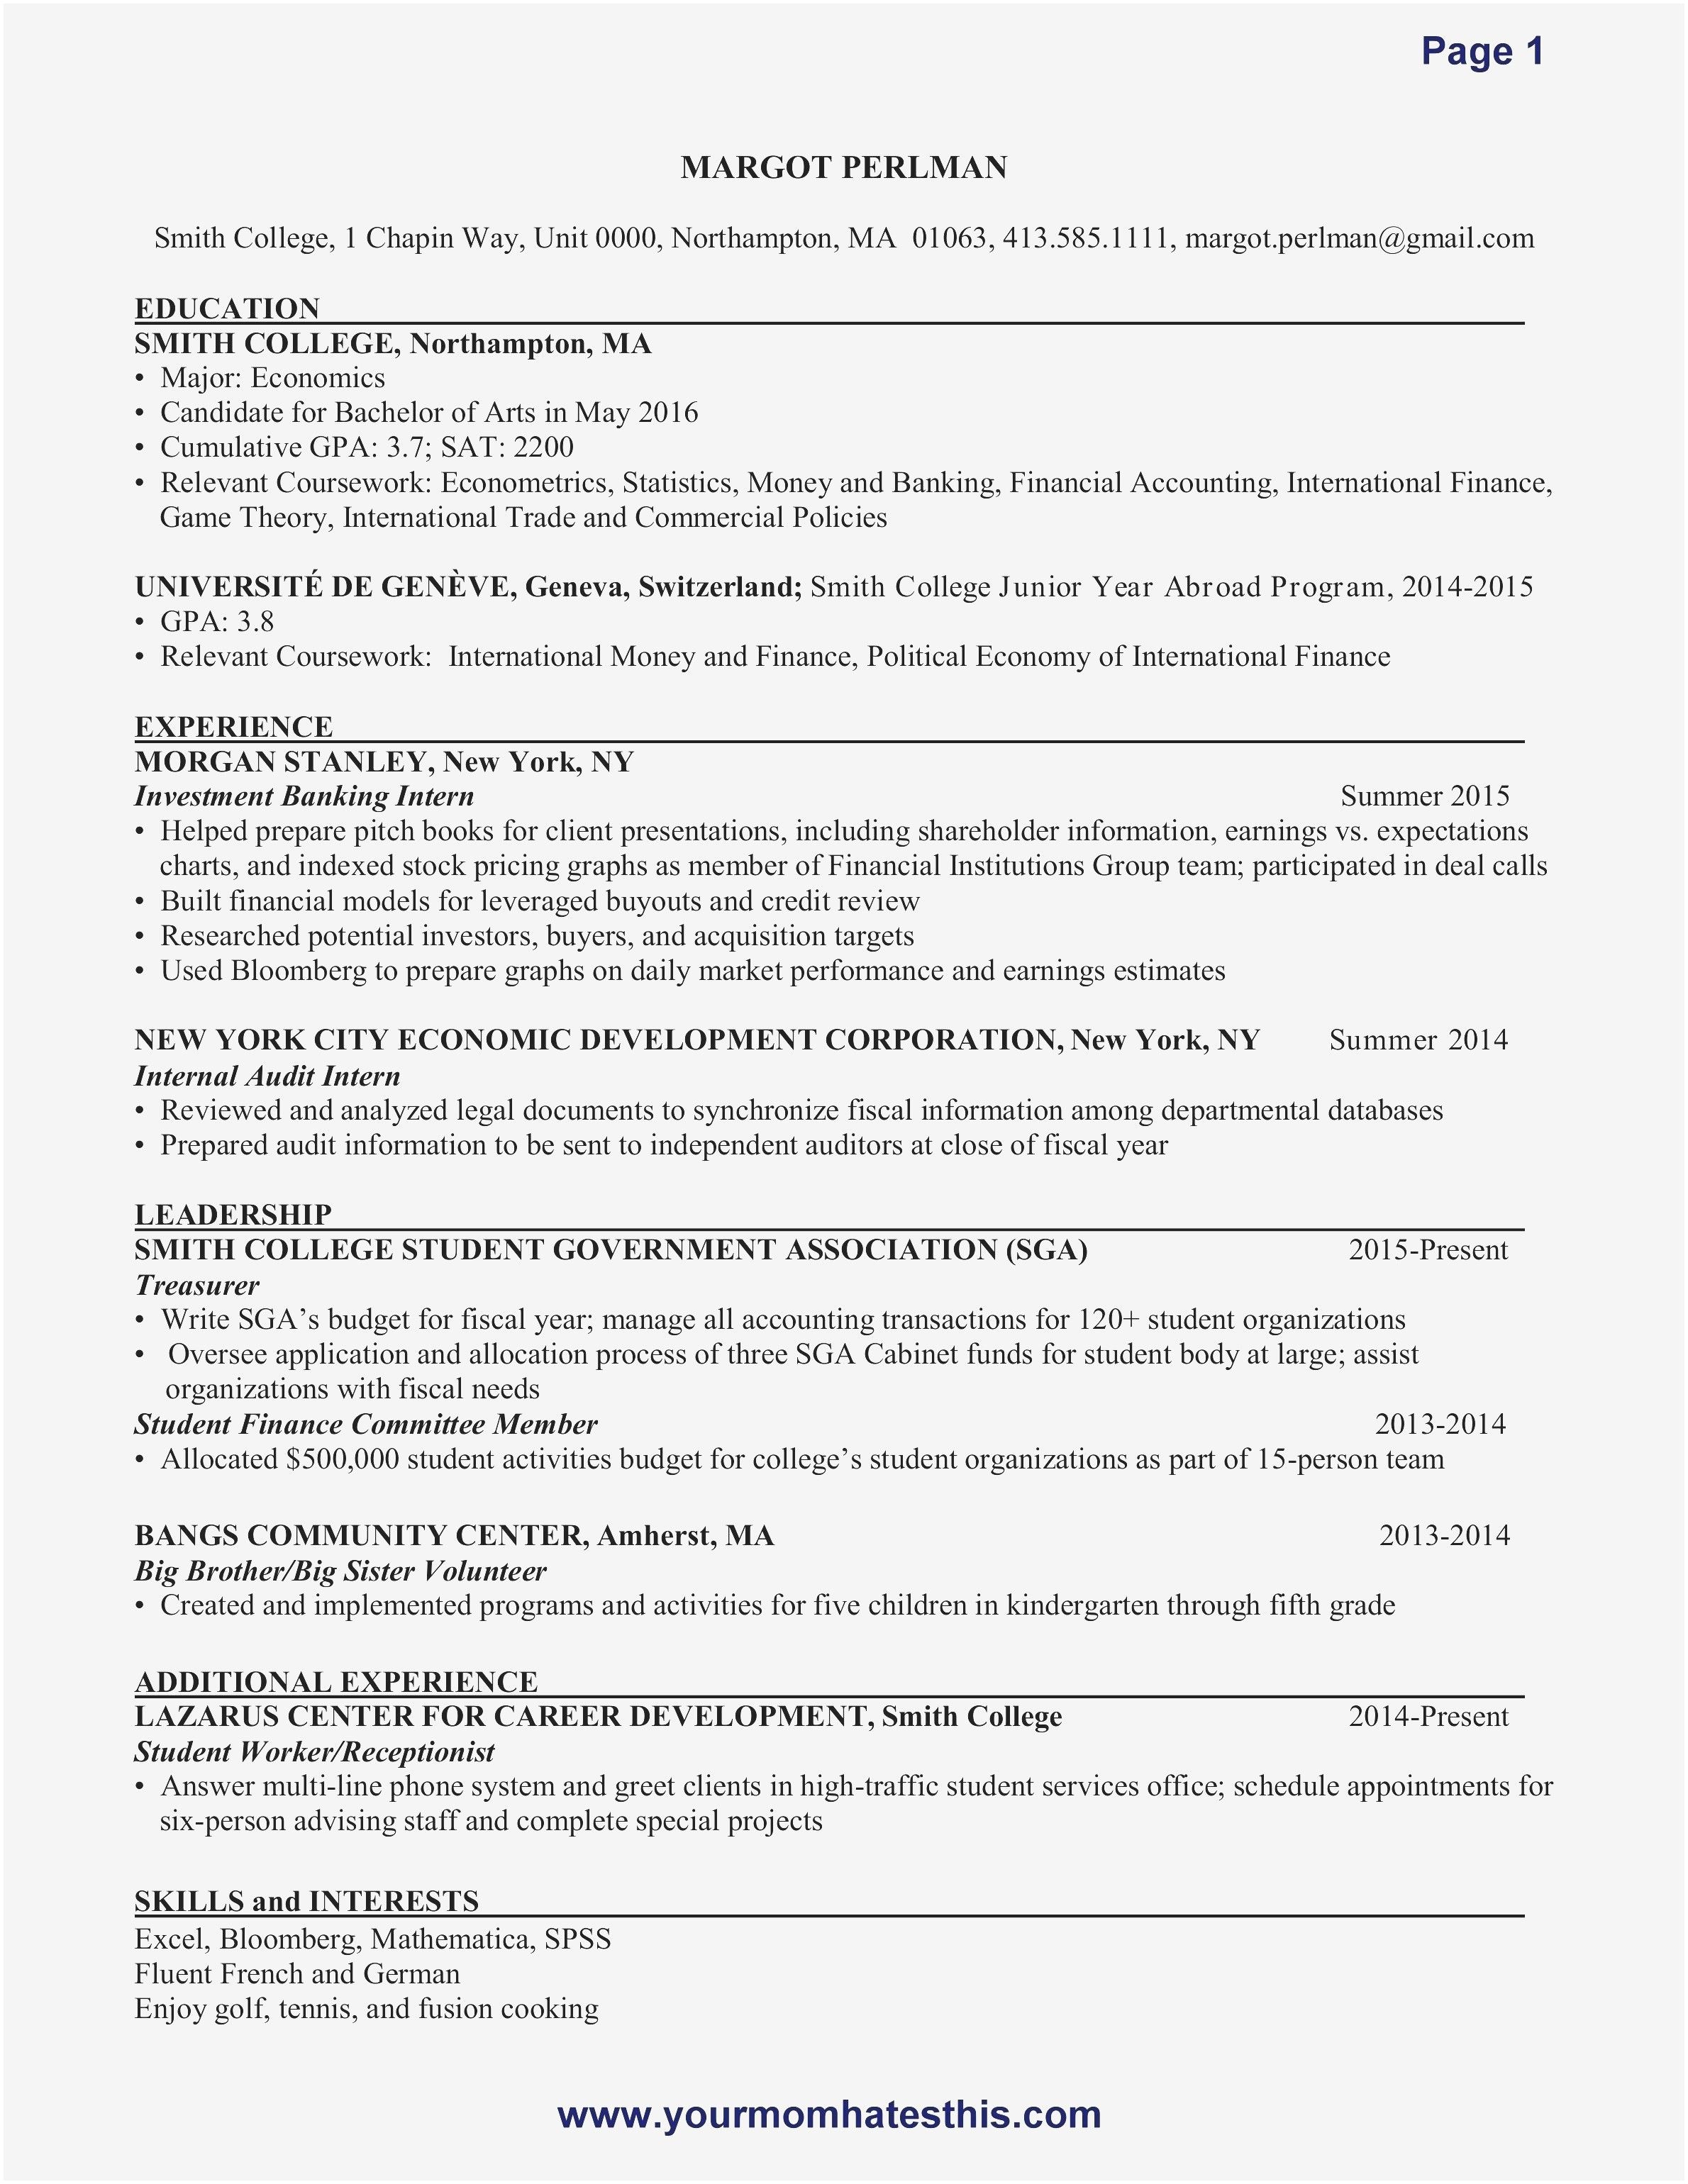 Resume Samples Management New Resume Examples Property Management Resume Awesome Bsw Resume 0d